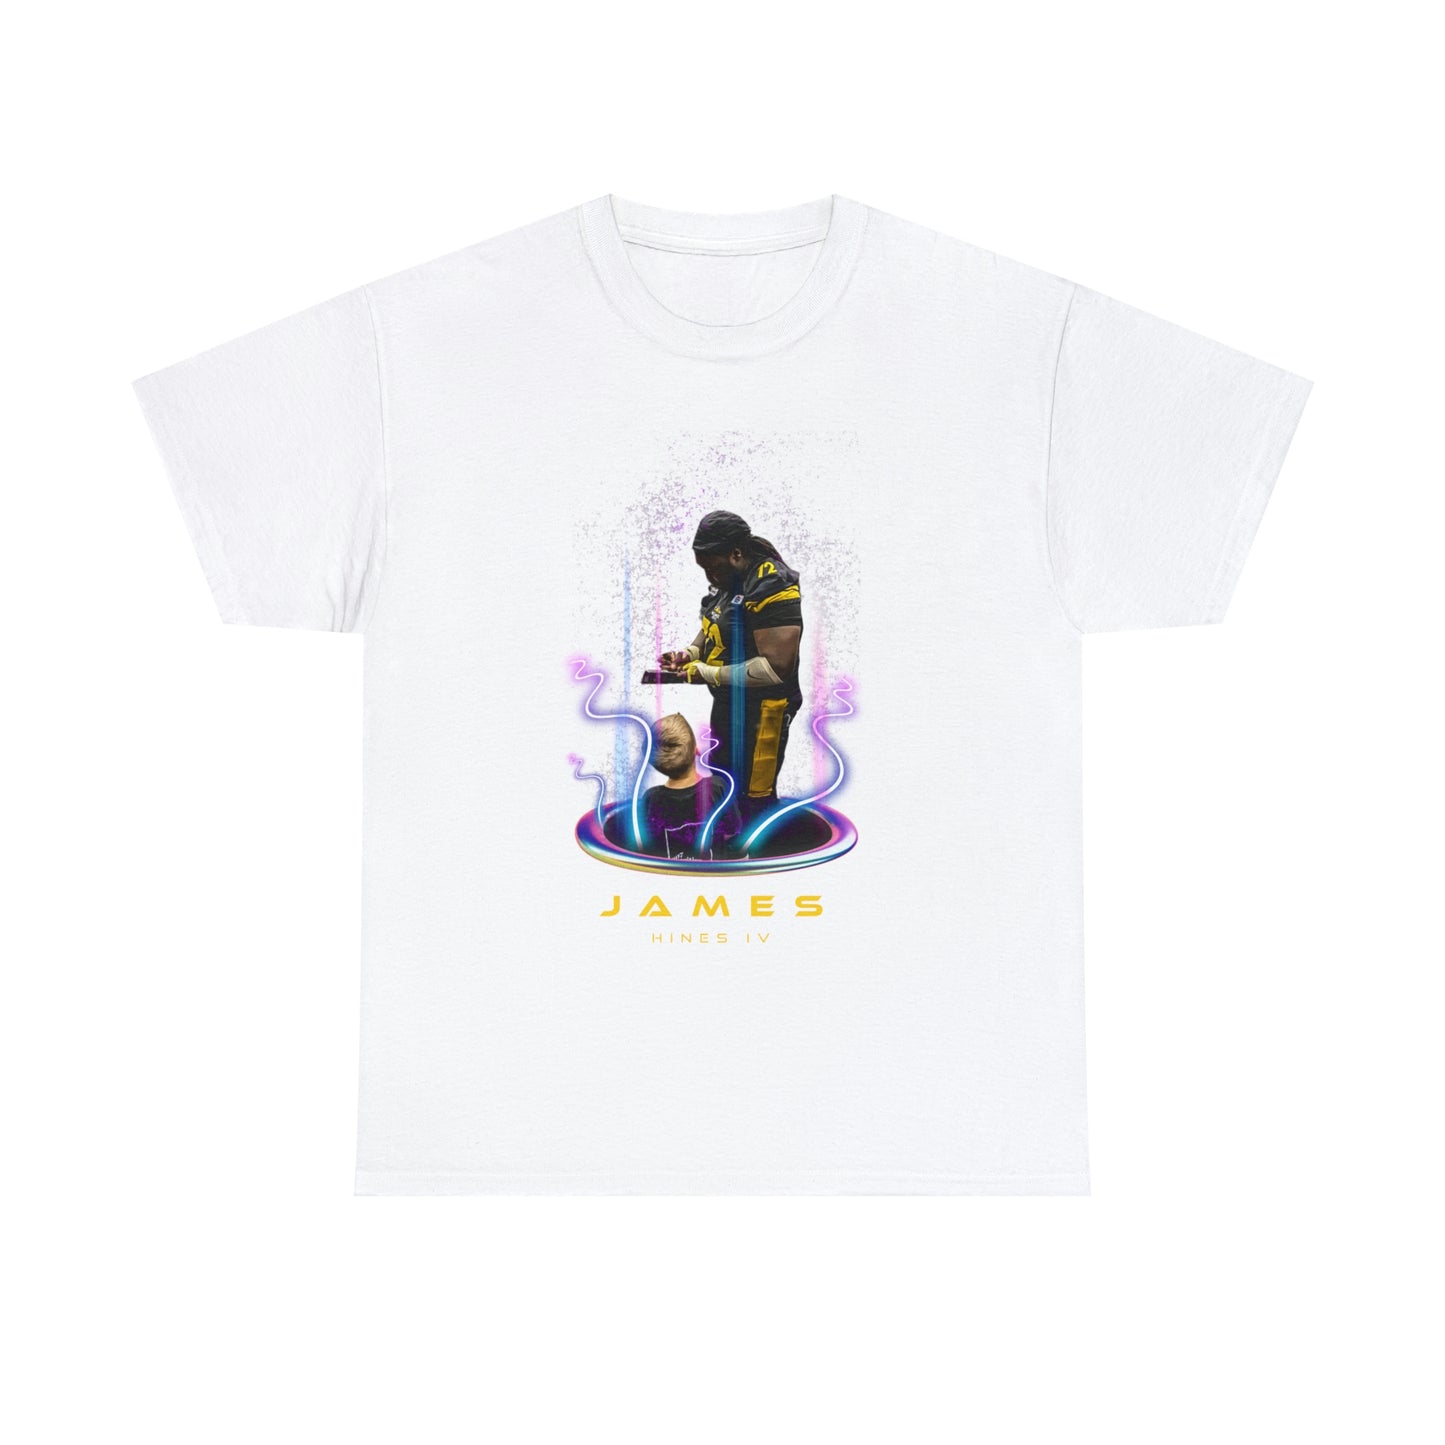 James Hines IV Trippy Graphic Tee